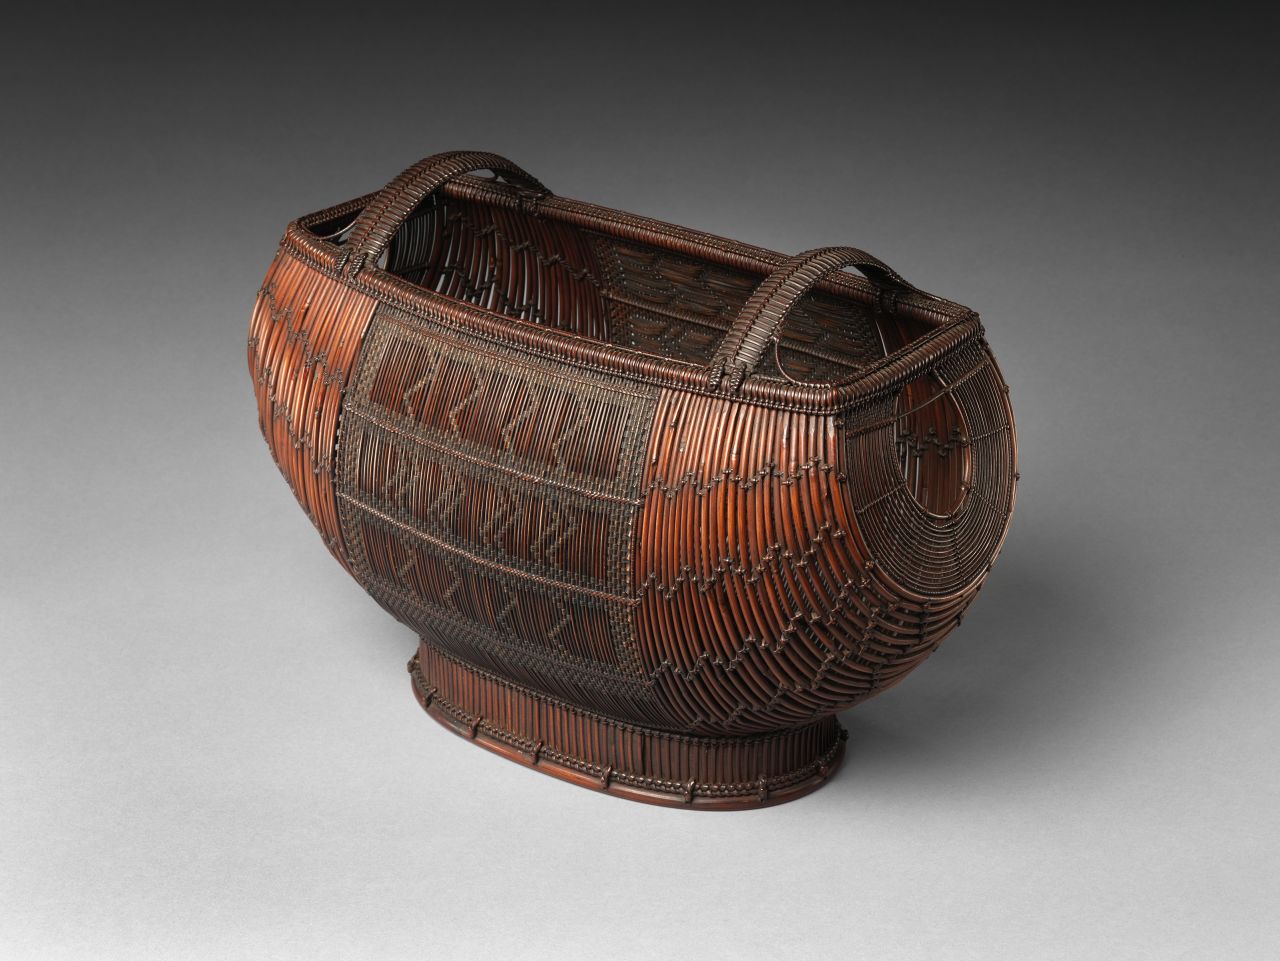 Despite requiring decades of mastery -- and being steeped in centuries of tradition -- the craft of basket making had been passed between generations and was not always considered an elite art.